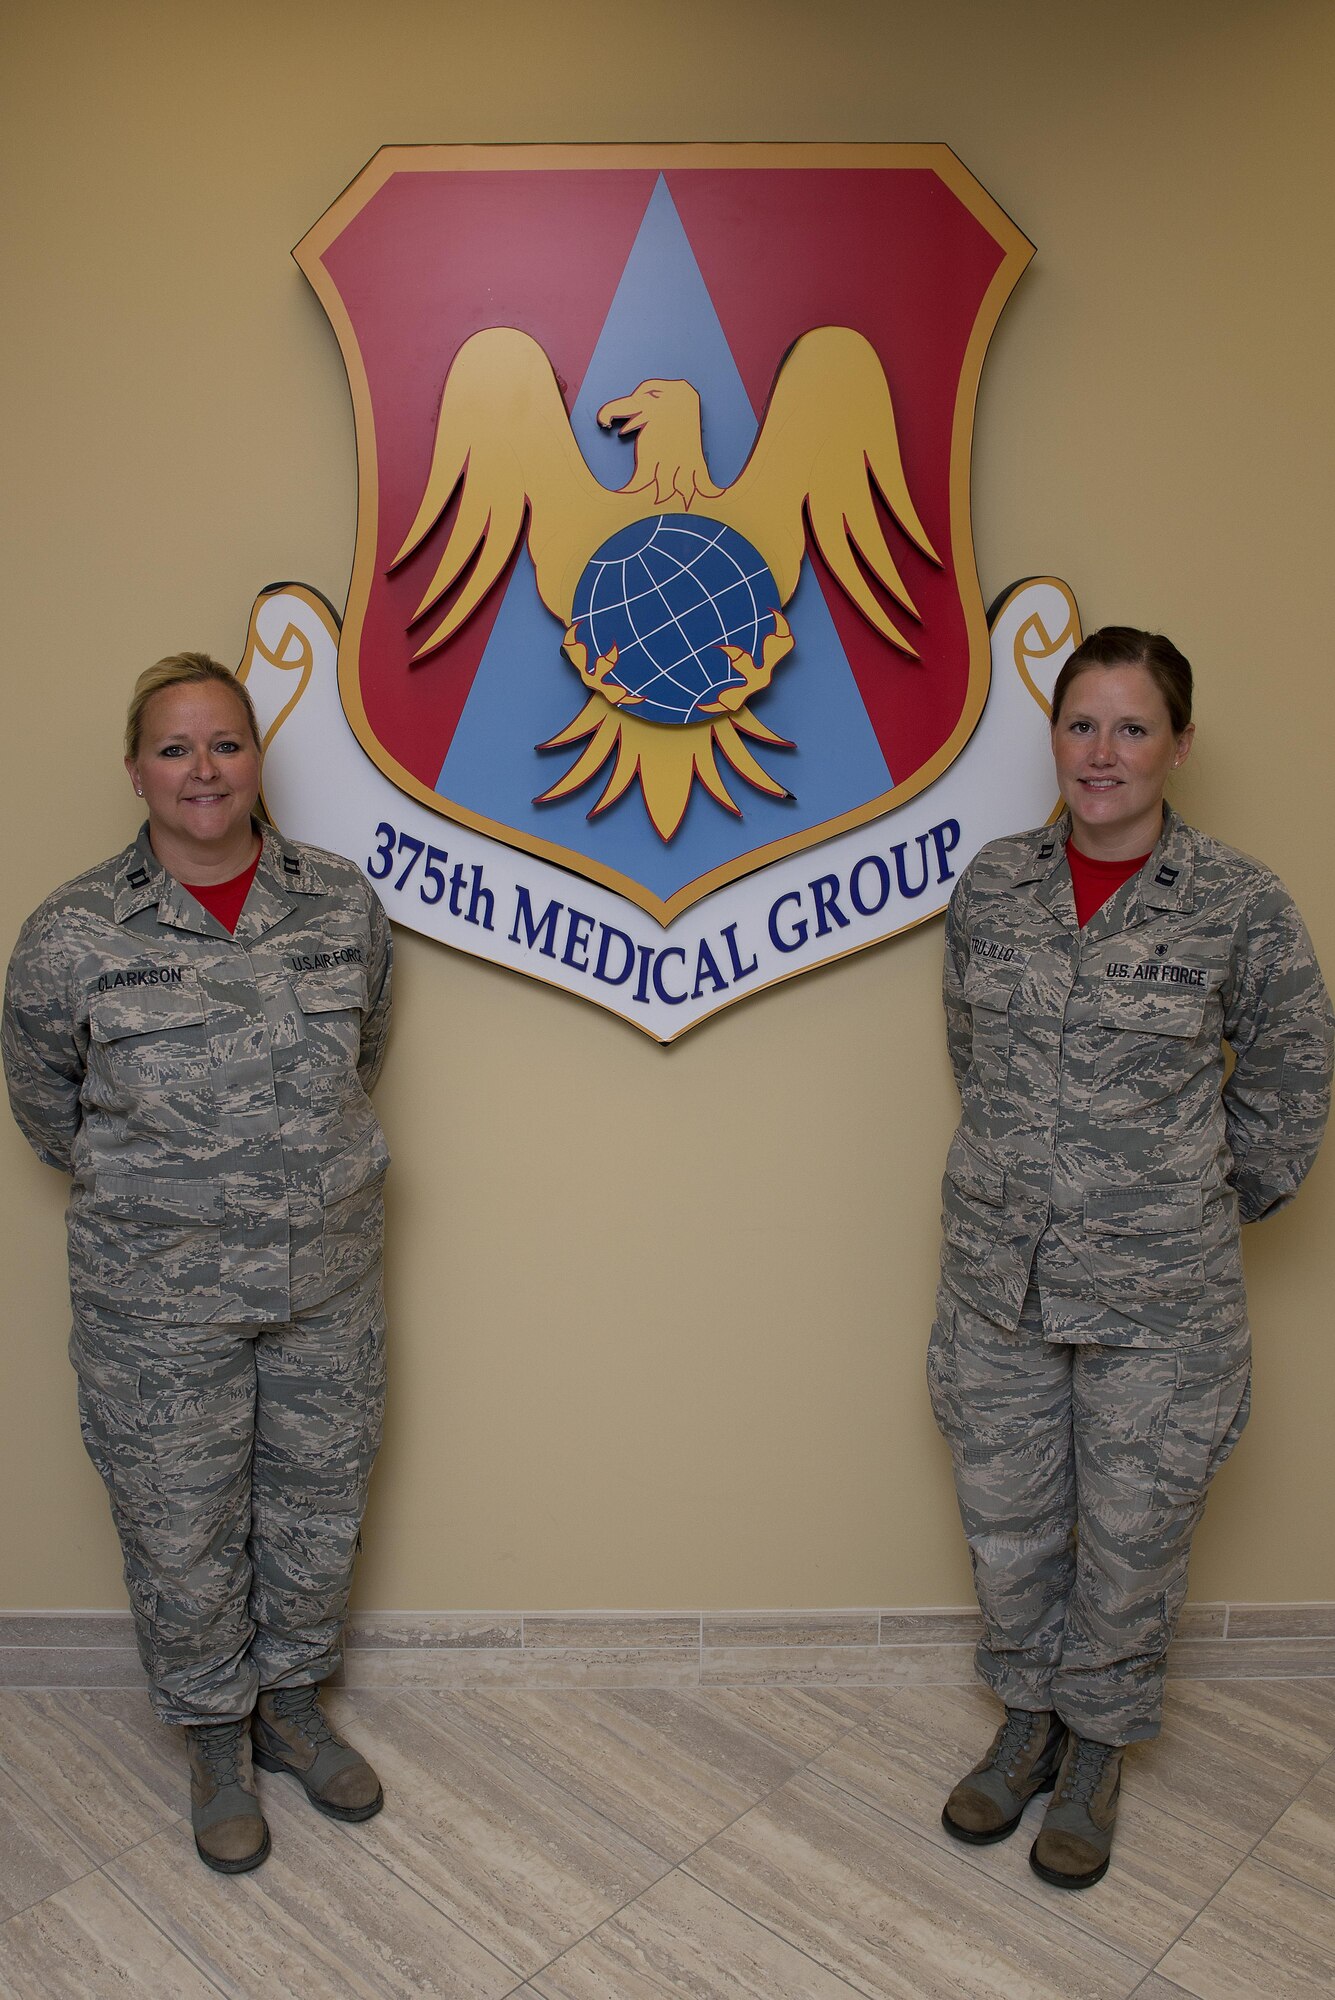 Capts. Linda Clarkson and Michelle Trujillo saved a 9-year-old boy over the Labor Day weekend Sept. 6, 2015 at Lost Valley Lake Resort in Owensville, Mo. The two nurses, at Scott Air Force Base 375th Medical Group, reacted quickly when they noticed the boy was blue and unresponsive, saving the child's life. (U.S. Air Force photo/Airman 1st Class Kiana Brothers)